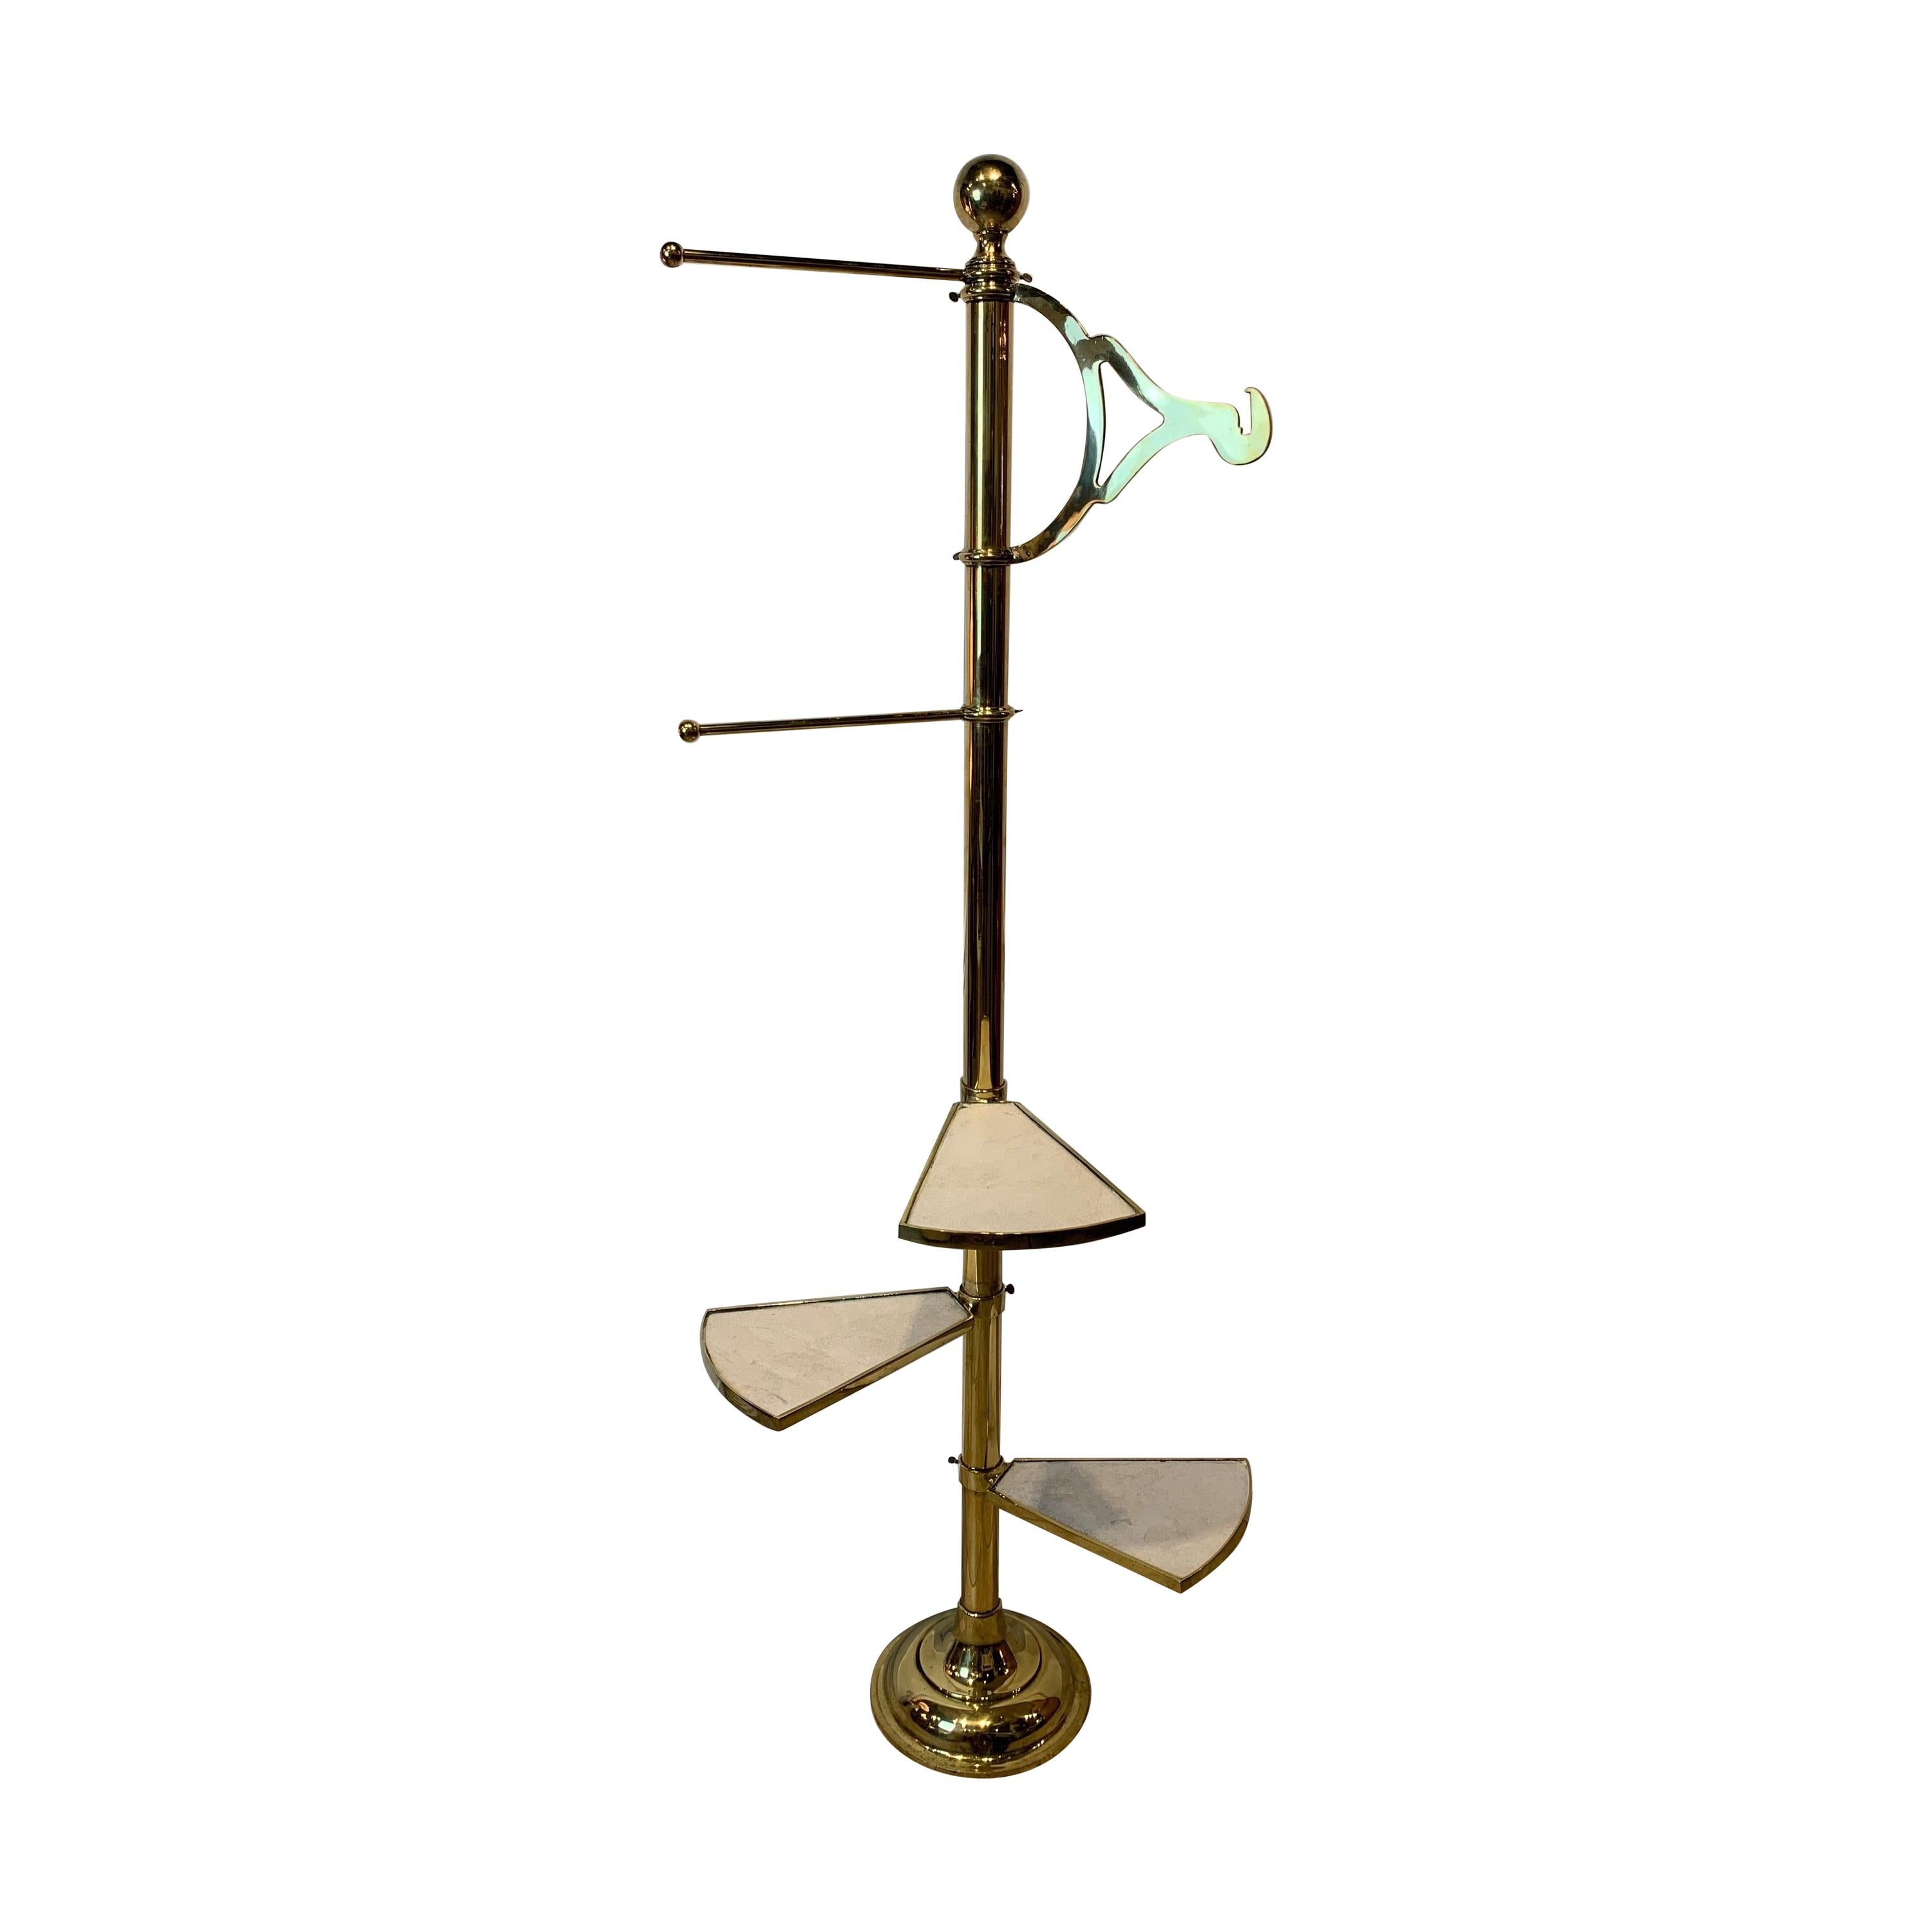 English Adjustable Brass Clothes Stand with Three Marble Insert Shelves